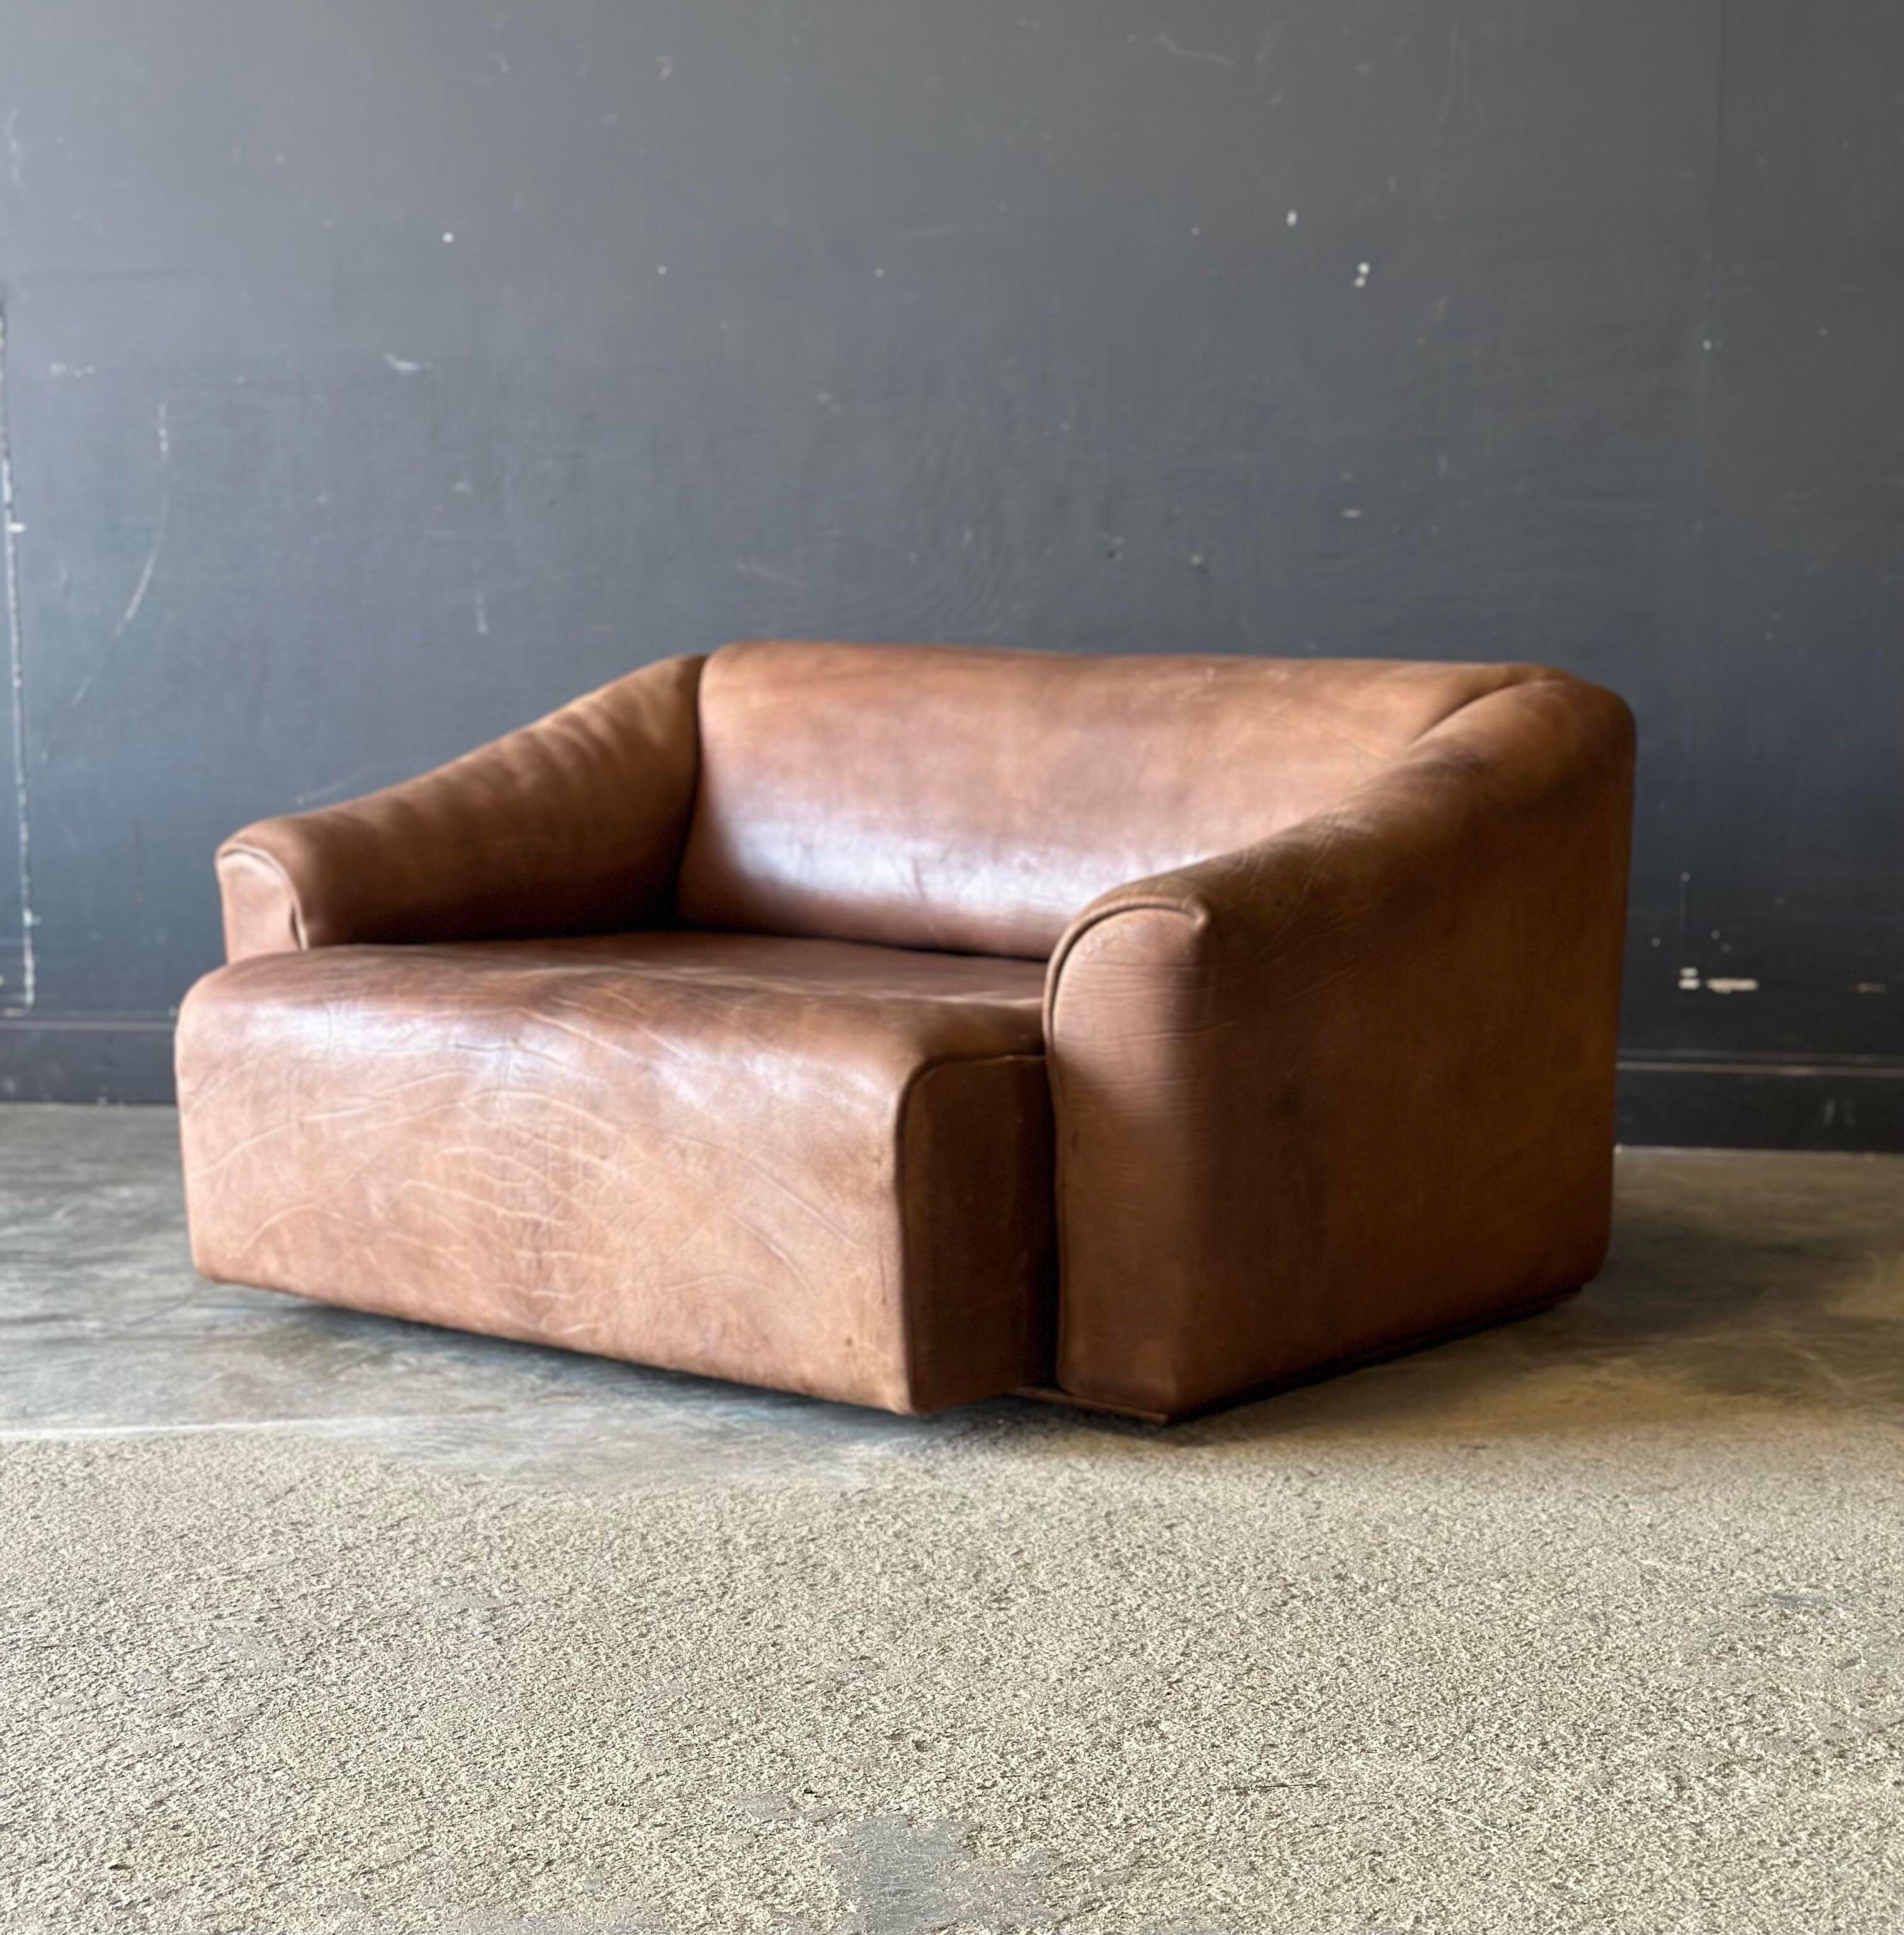 A Swiss De Sede Ds-47 loveseat sofa. An icon of mid century modern design, it is covered in raw uncoated buffalo hide. Extremely soft and comfortable, the sofa extends and reclines.